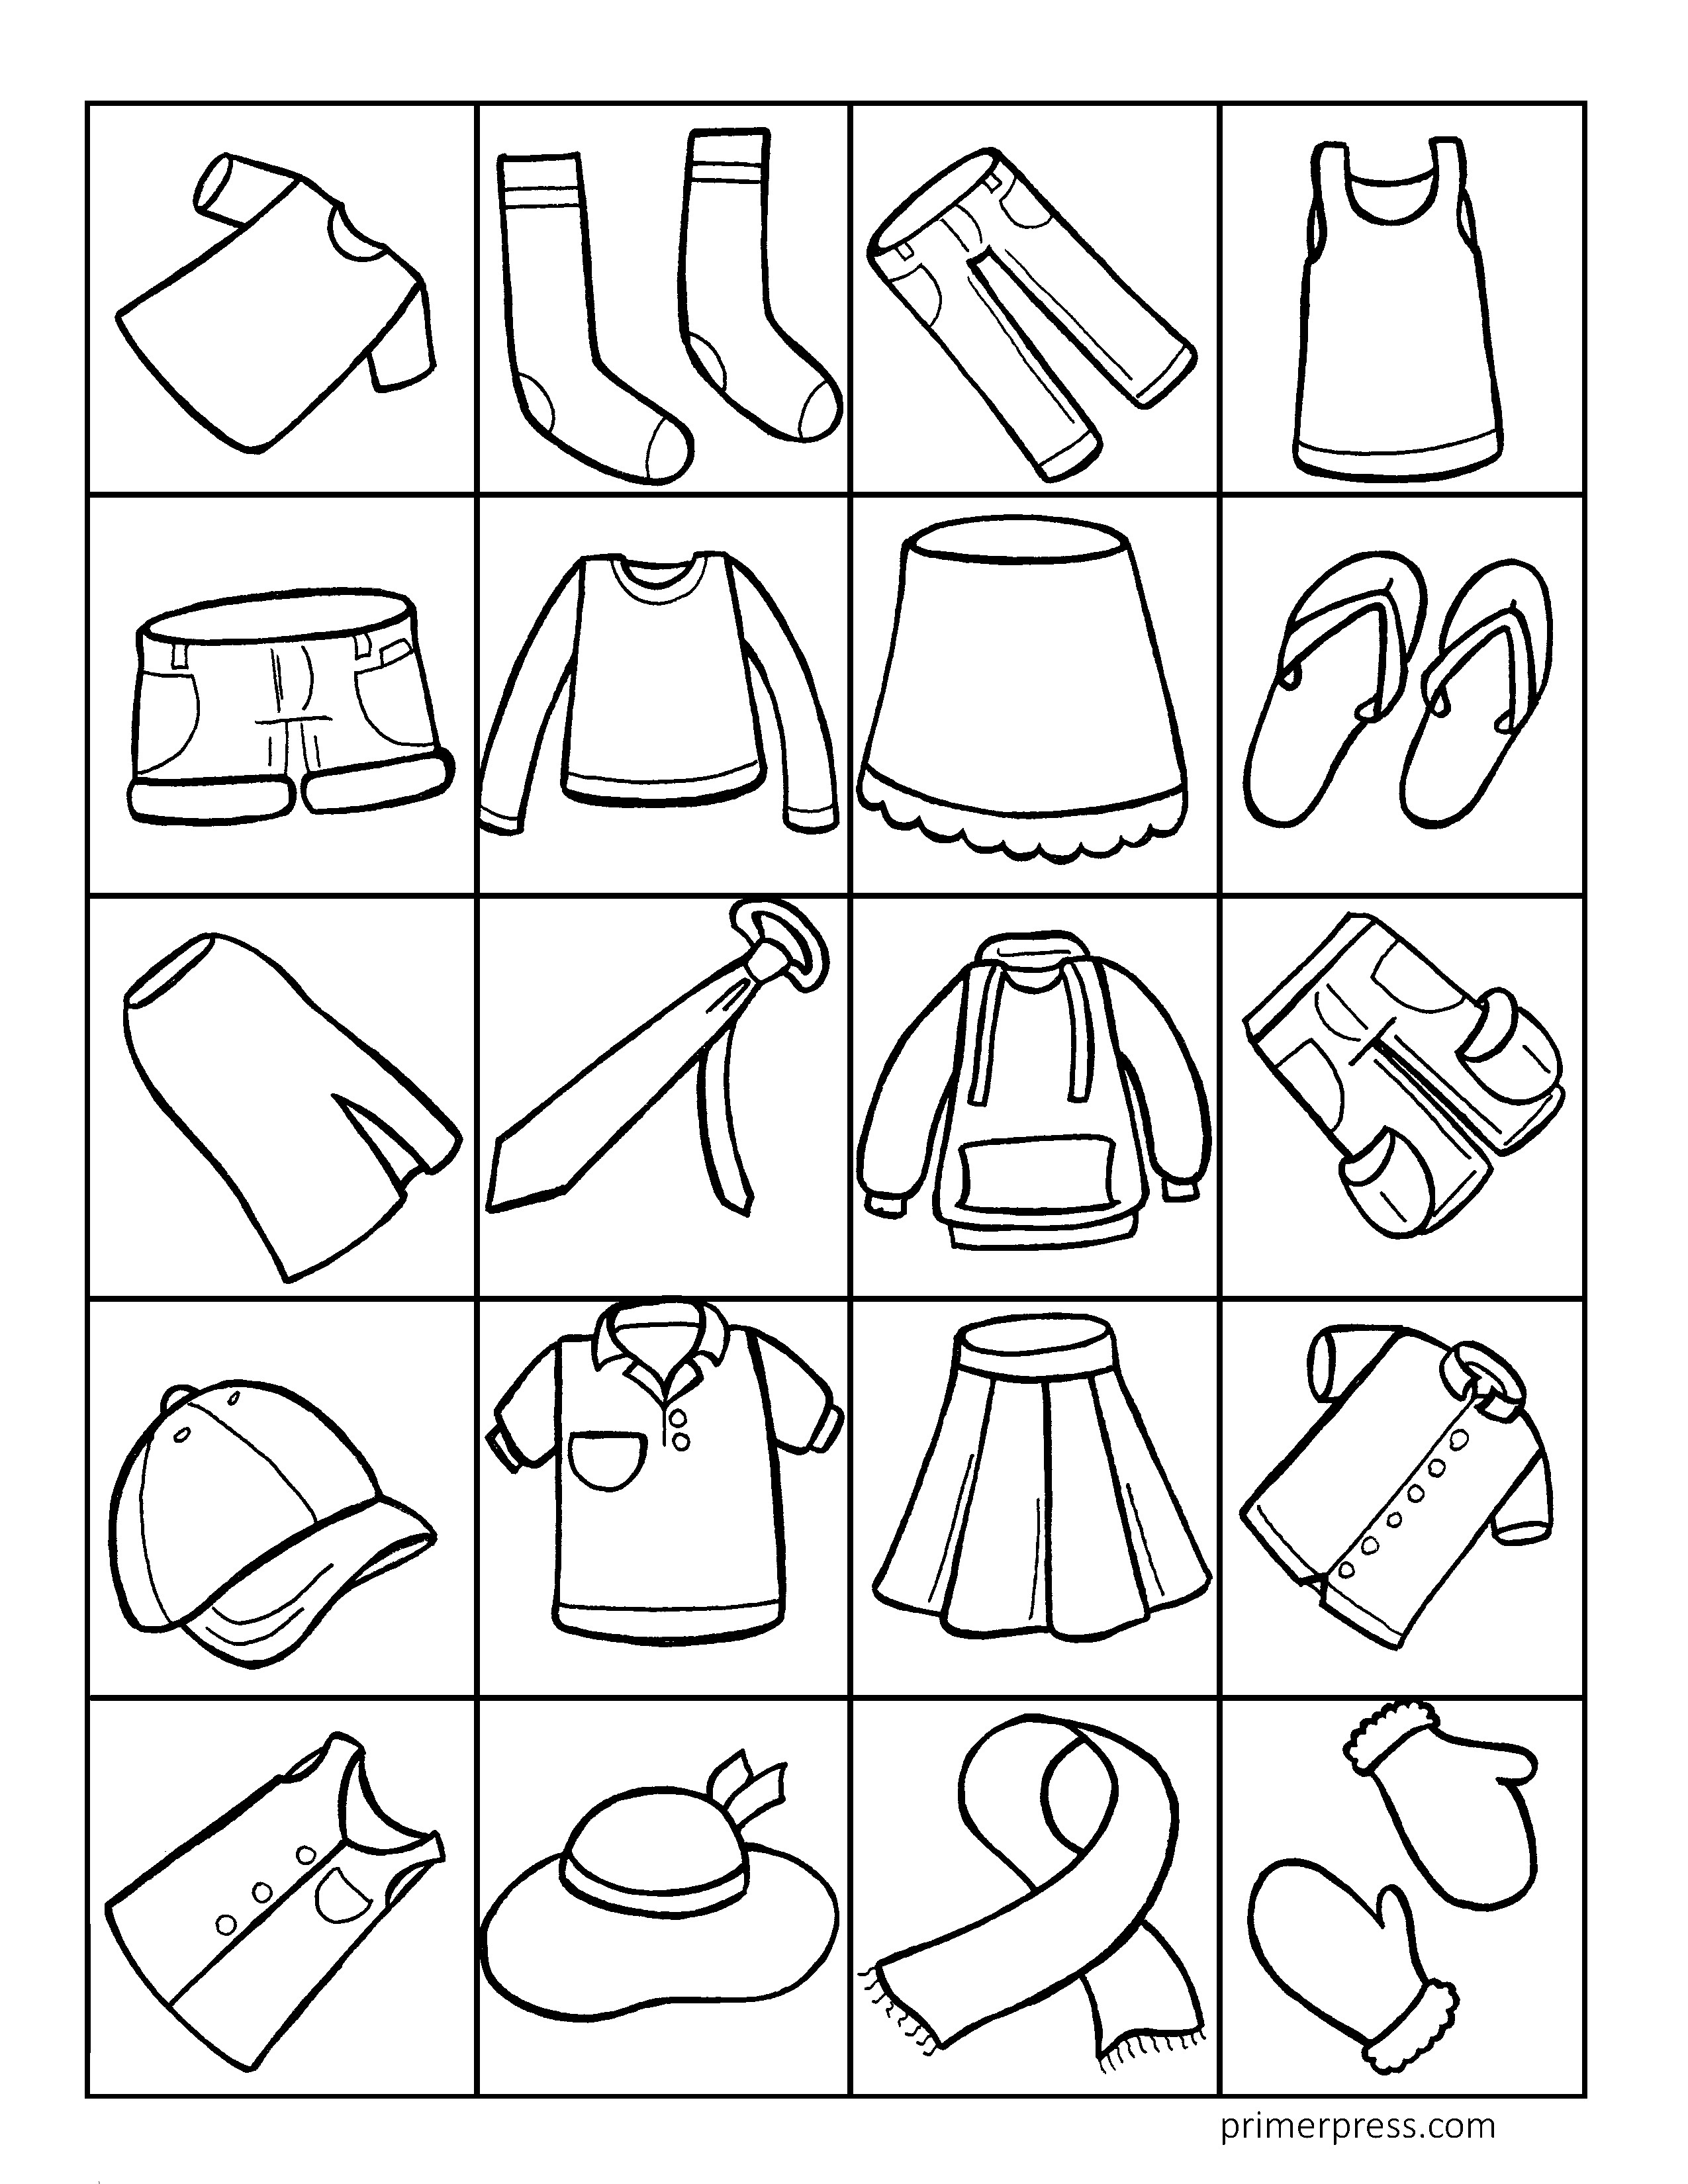 Coloring Page Clothes